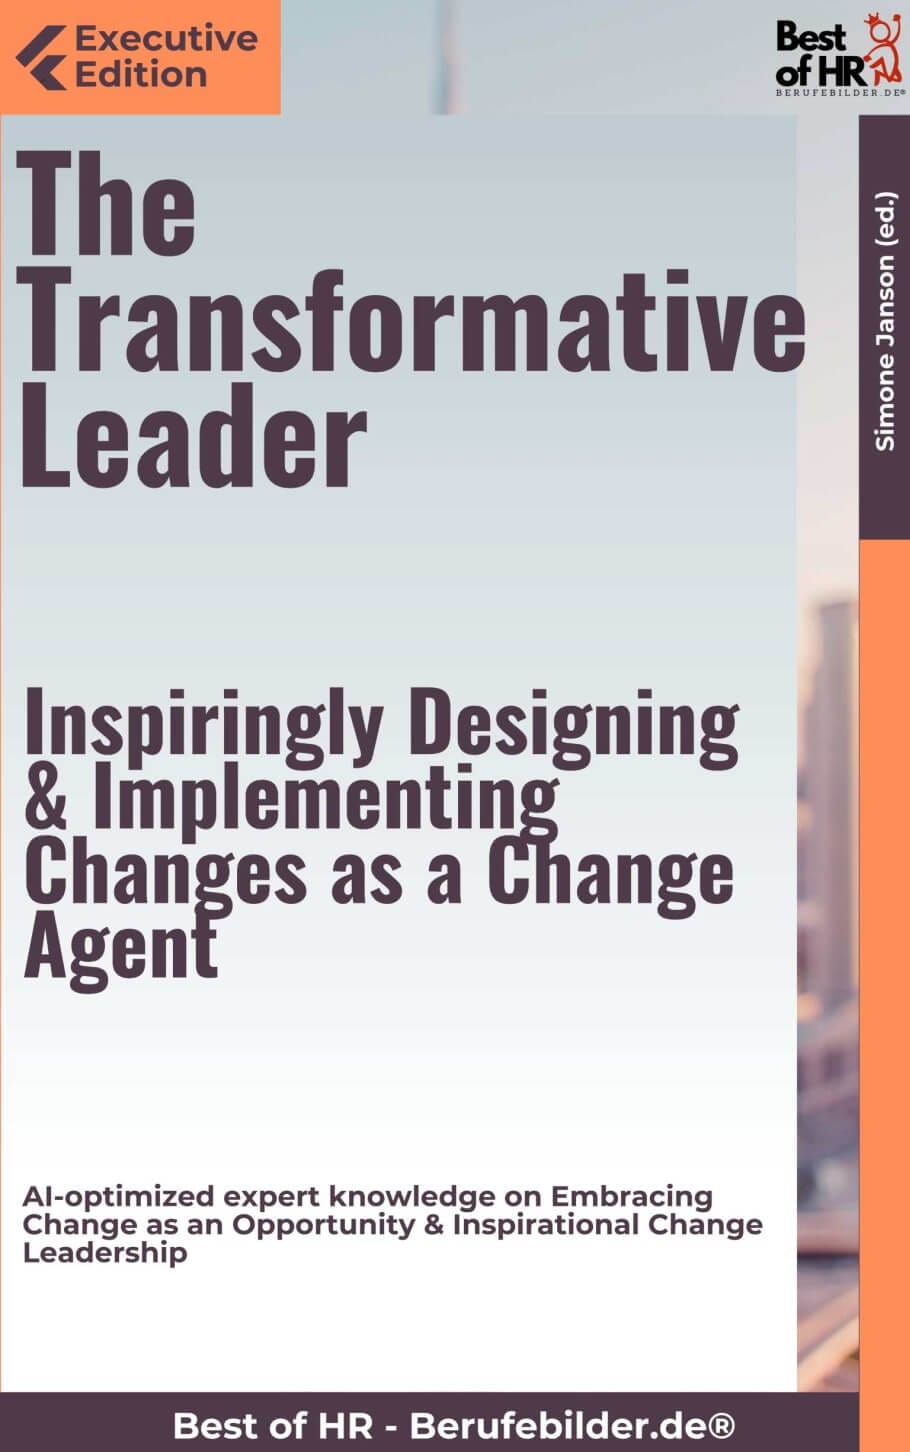 The Transformative Leader – Inspiringly Designing & Implementing Changes as a Change Agent (Engl. Version)